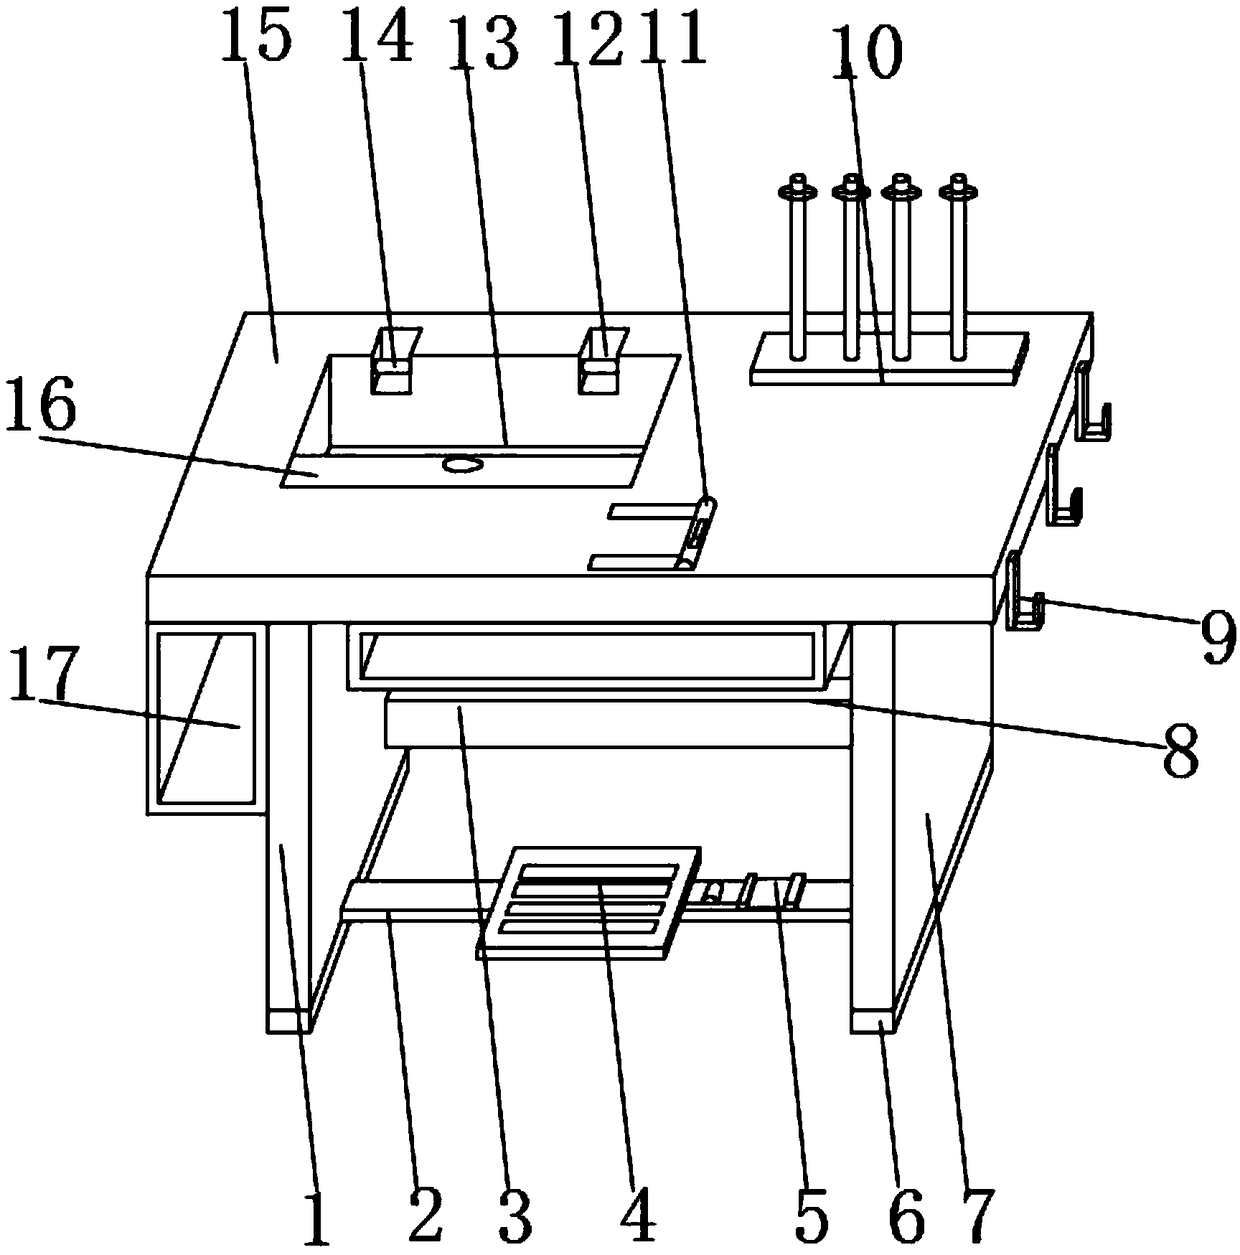 Sewing machine operating desk for bag production